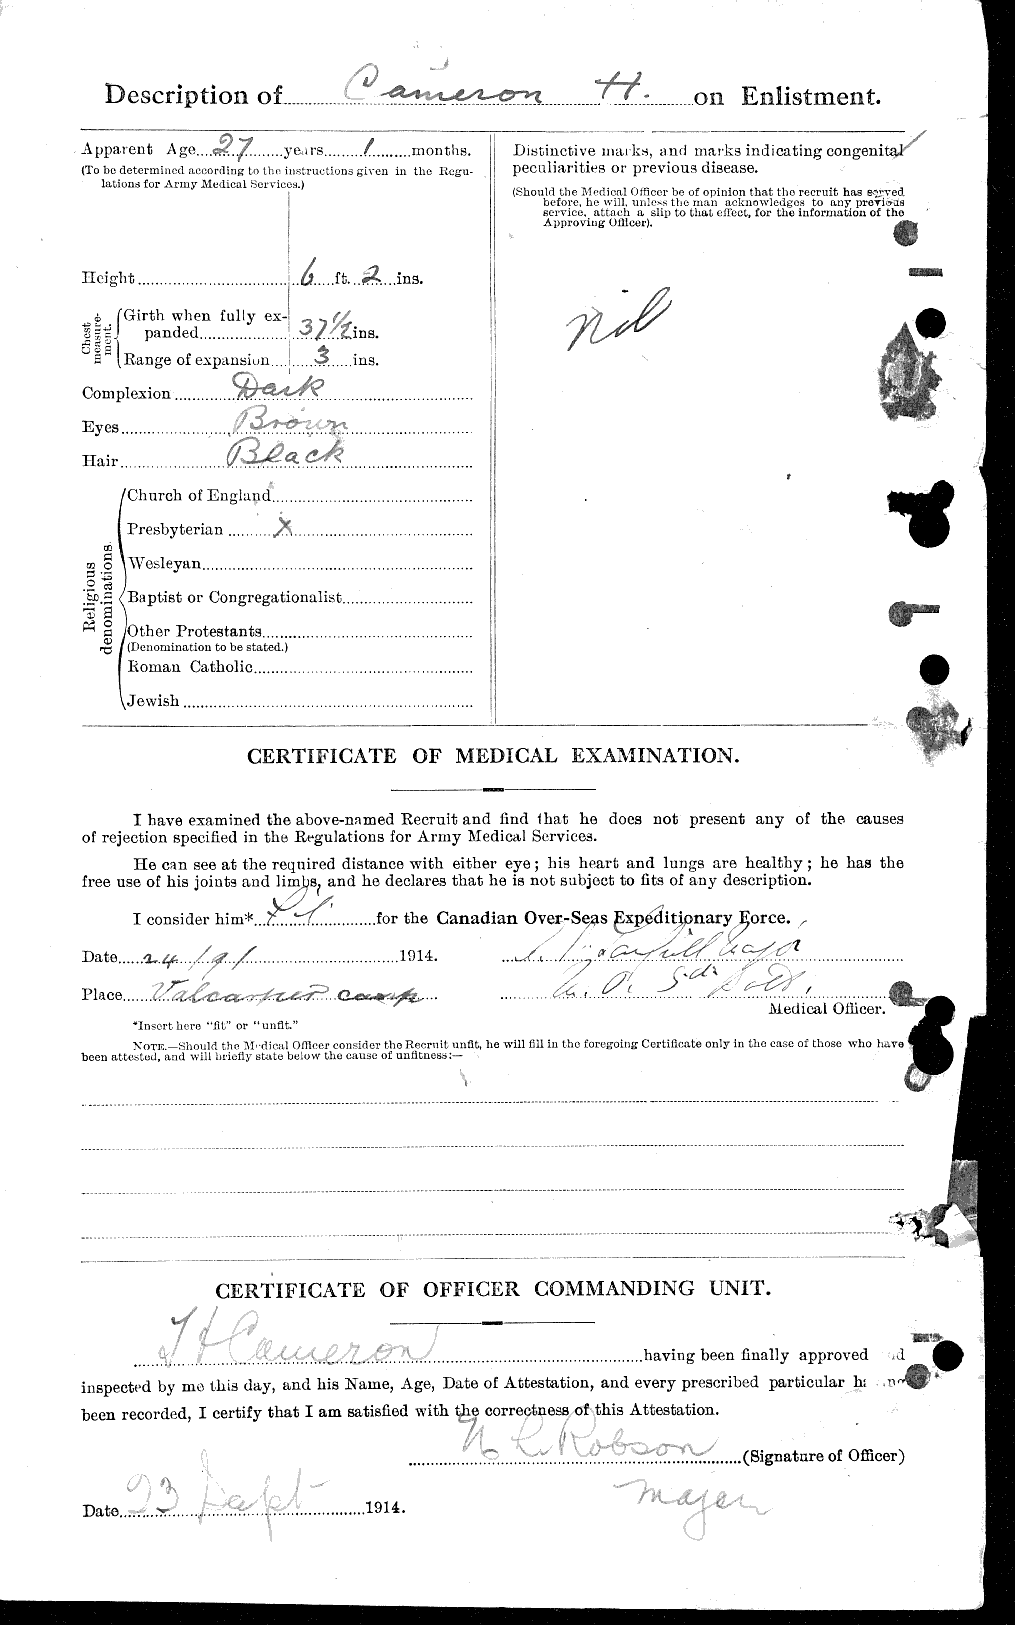 Personnel Records of the First World War - CEF 002655b